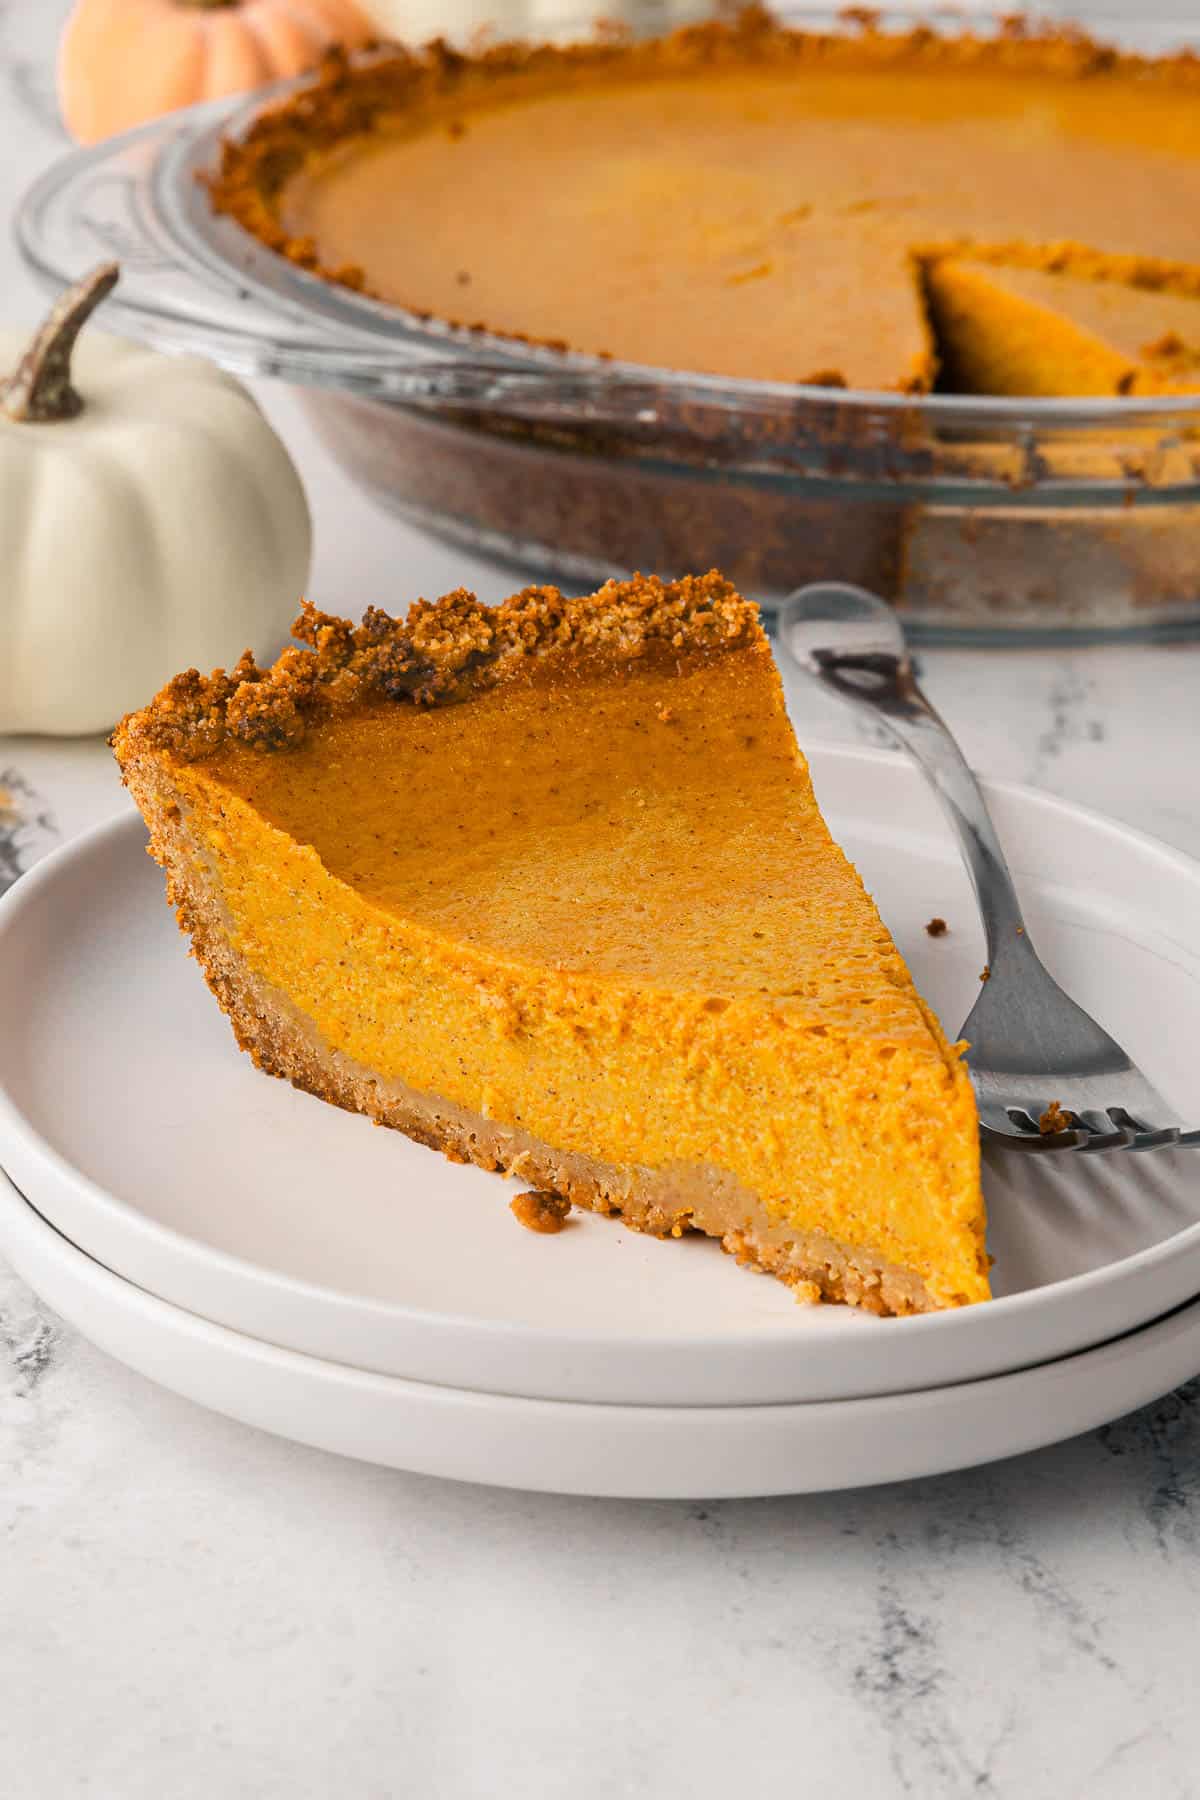 Slice of pumpkin pie on a plate with whole pie in a glass pie dish nearby.